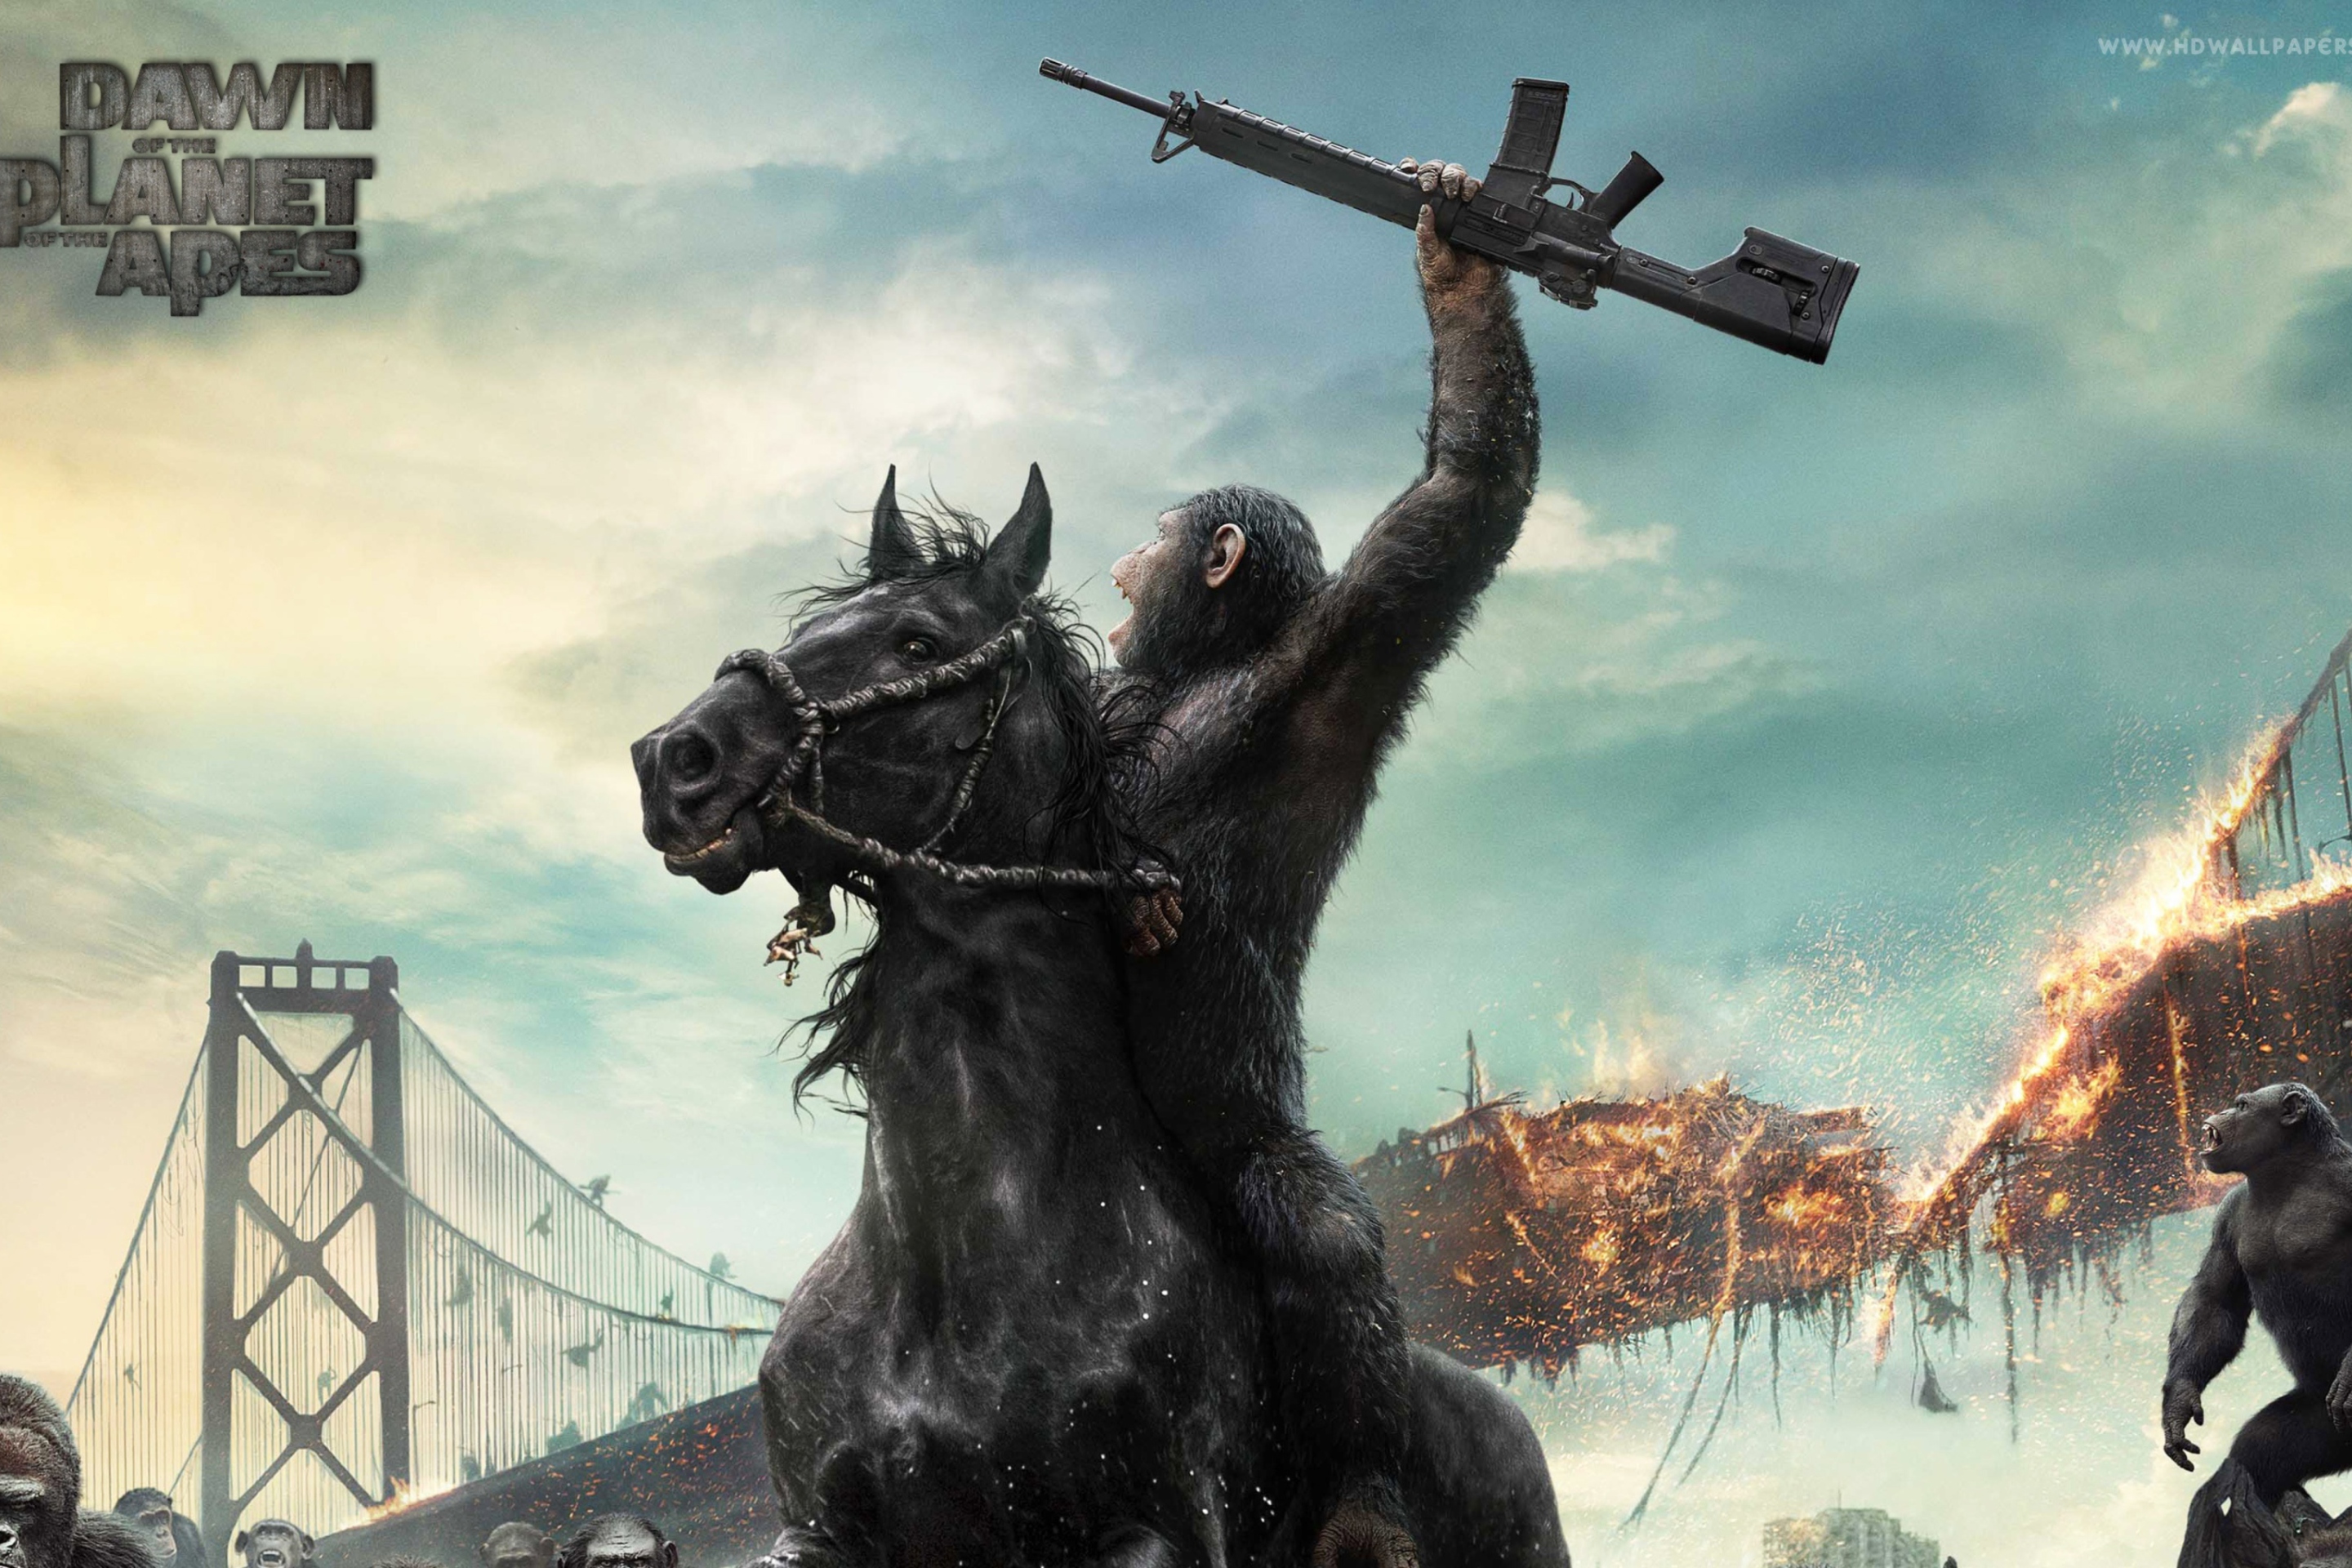 Dawn Of The Planet Of The Apes Movie wallpaper 2880x1920